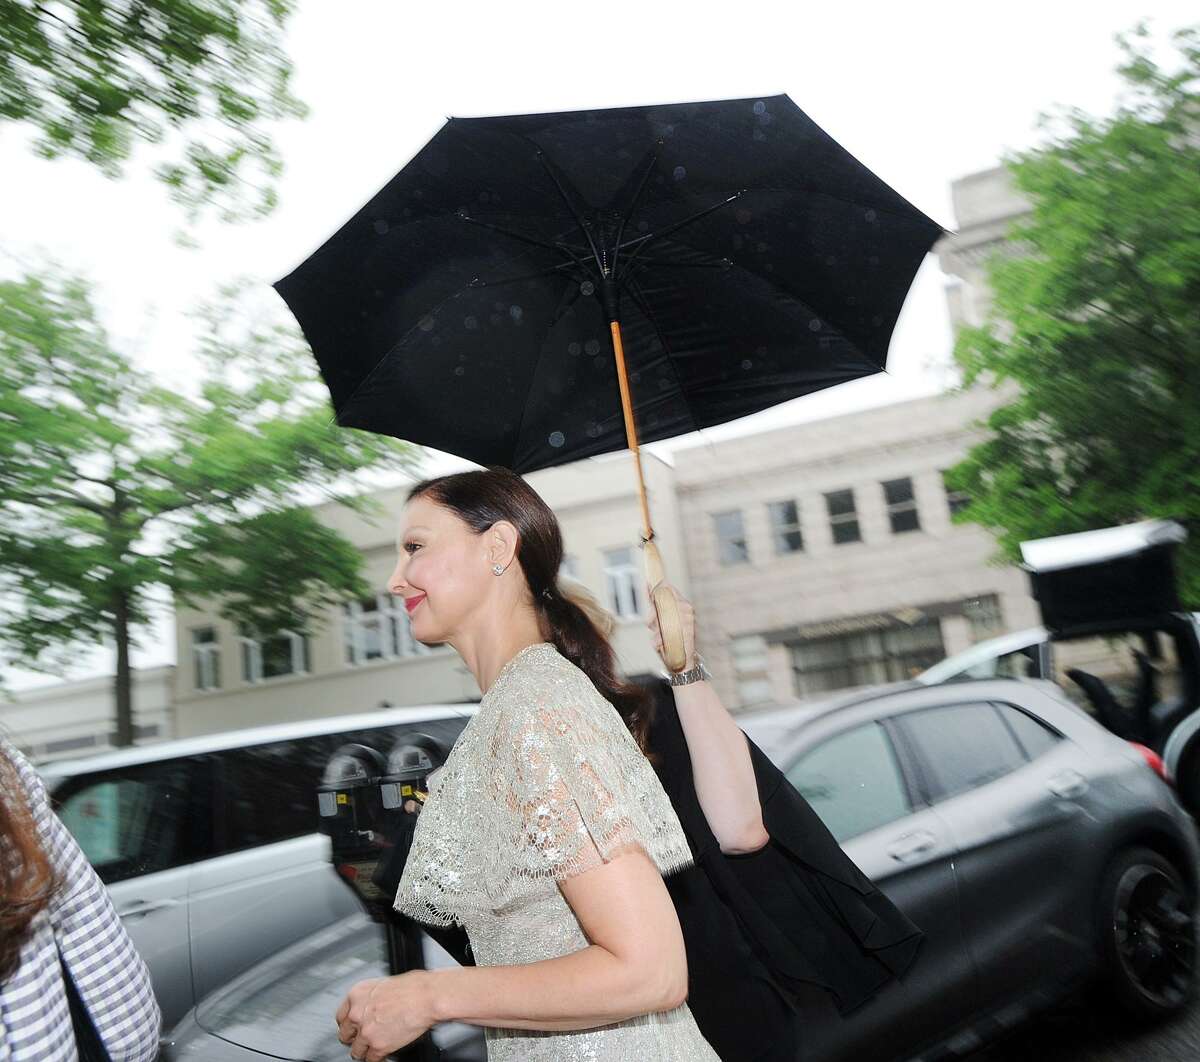 Ashley Judd arrives in the rain during the start of the Greenwich International Film Festival Changemaker Gala at Betteridge Jewelers in Greenwich, Conn., Thursday, May 31, 2018. The gala honored actress and activist Judd.